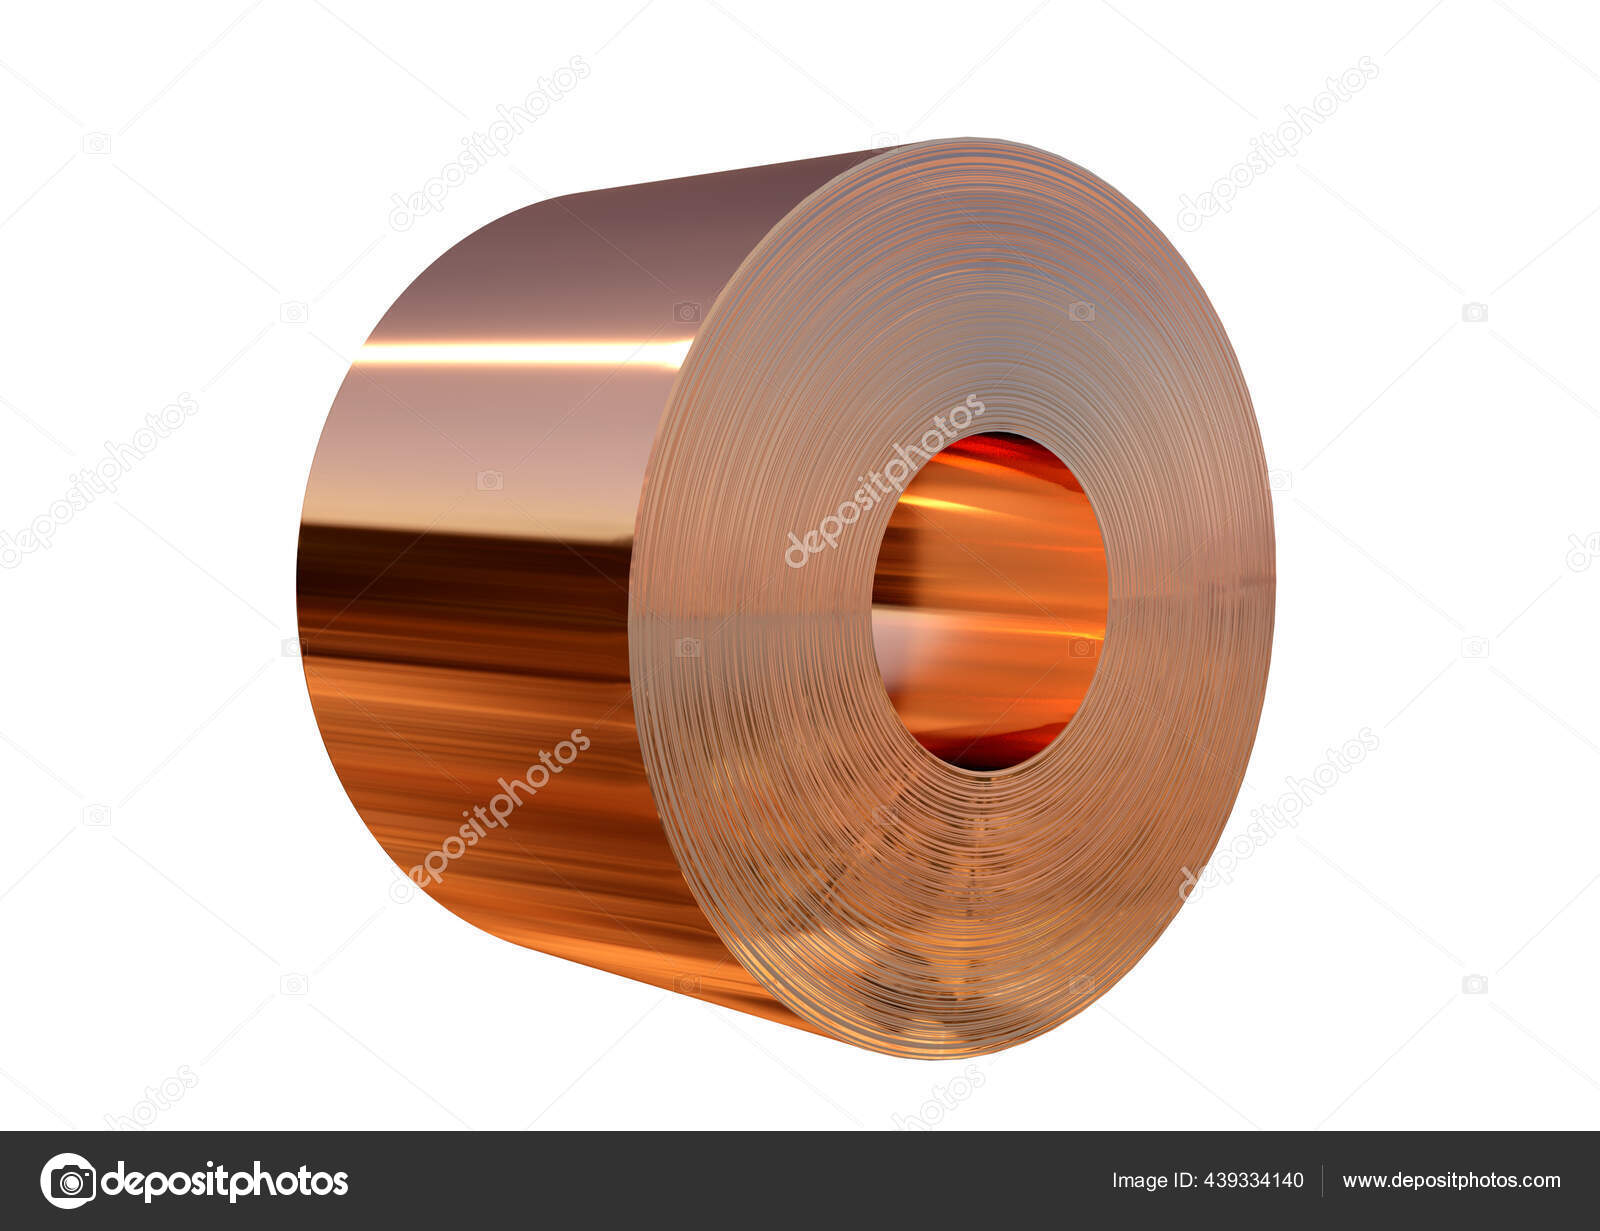 Copper Sheets Roll Isolated White Background Rendering Stock Photo by  ©agphotography 439334140